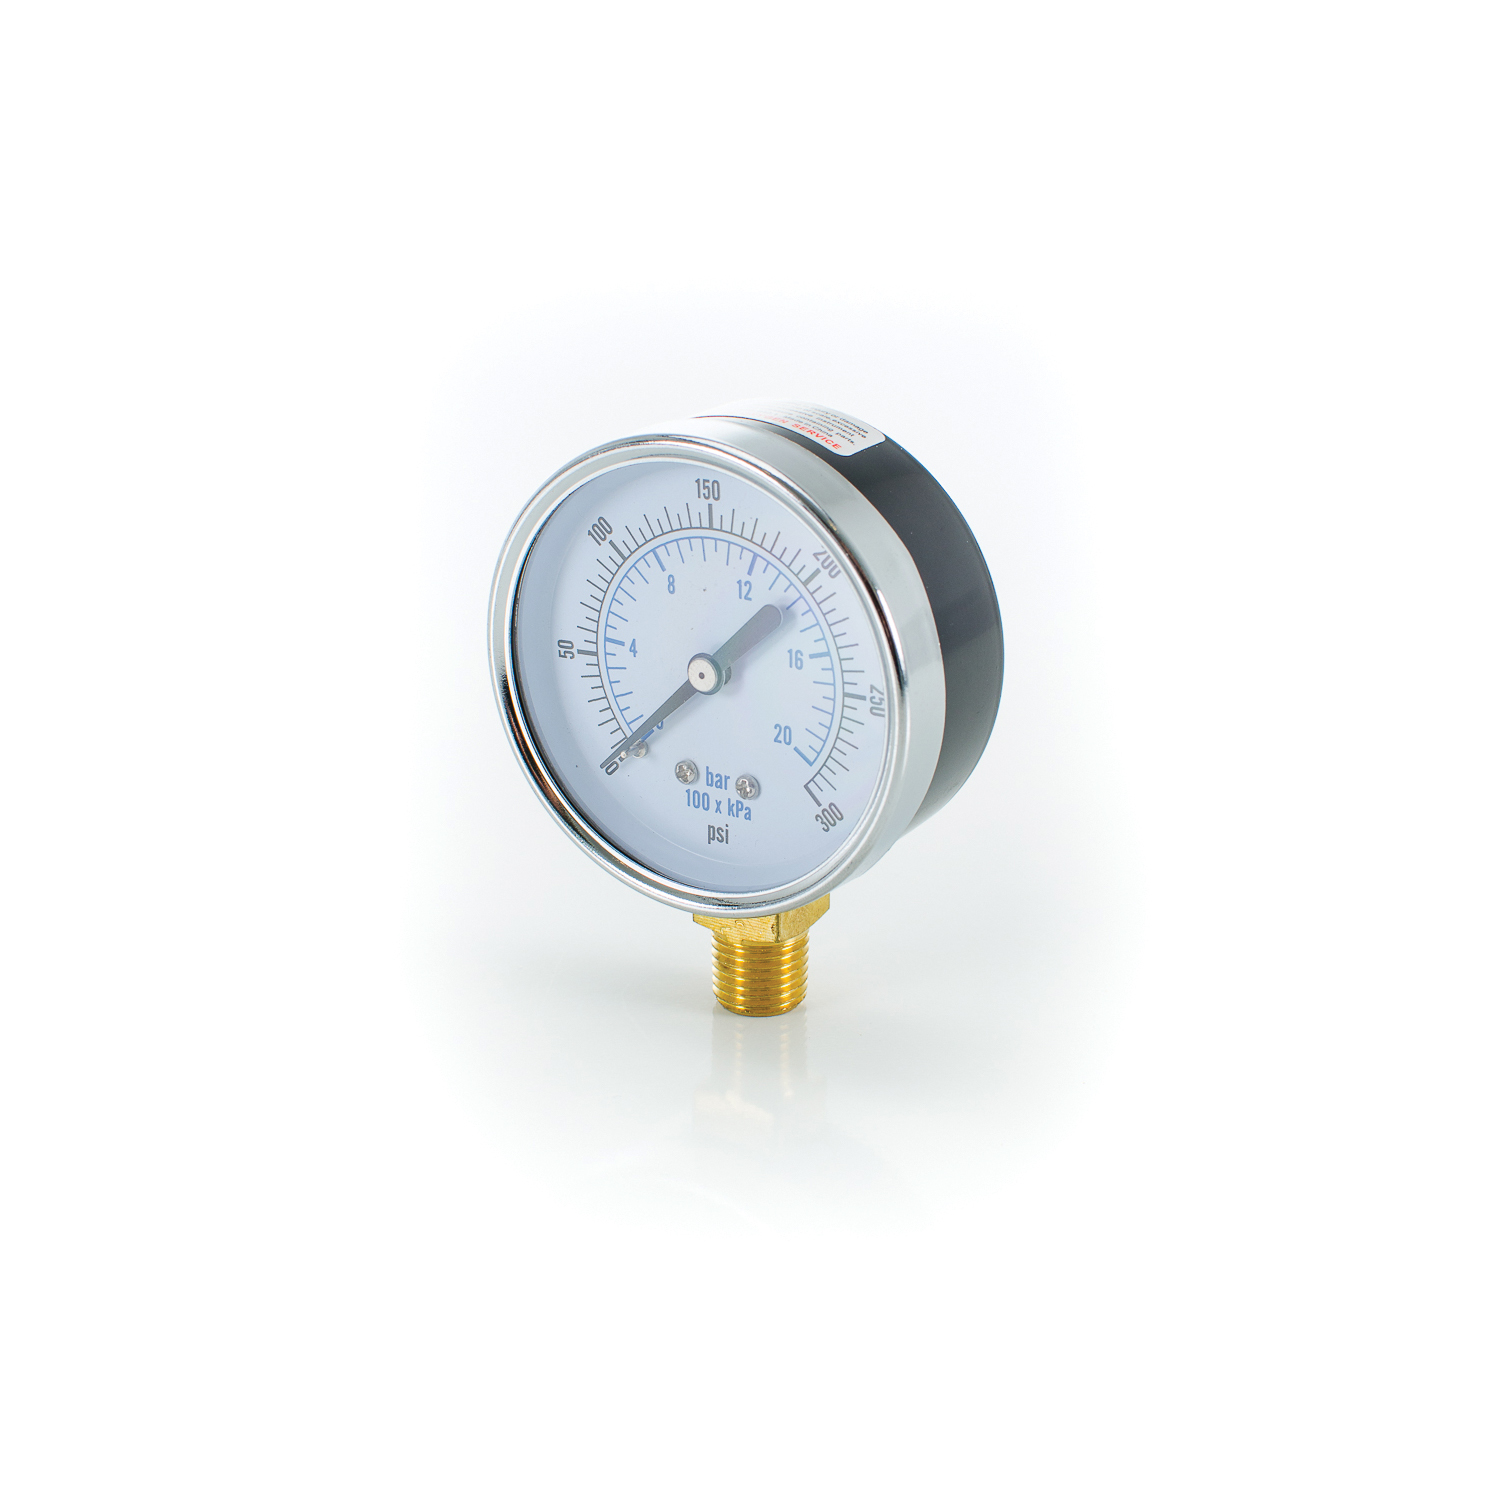 PASCO 1744 Pressure Gauge, 300 psi, 1/4 in MNPT Connection, 2-1/2 in Dial